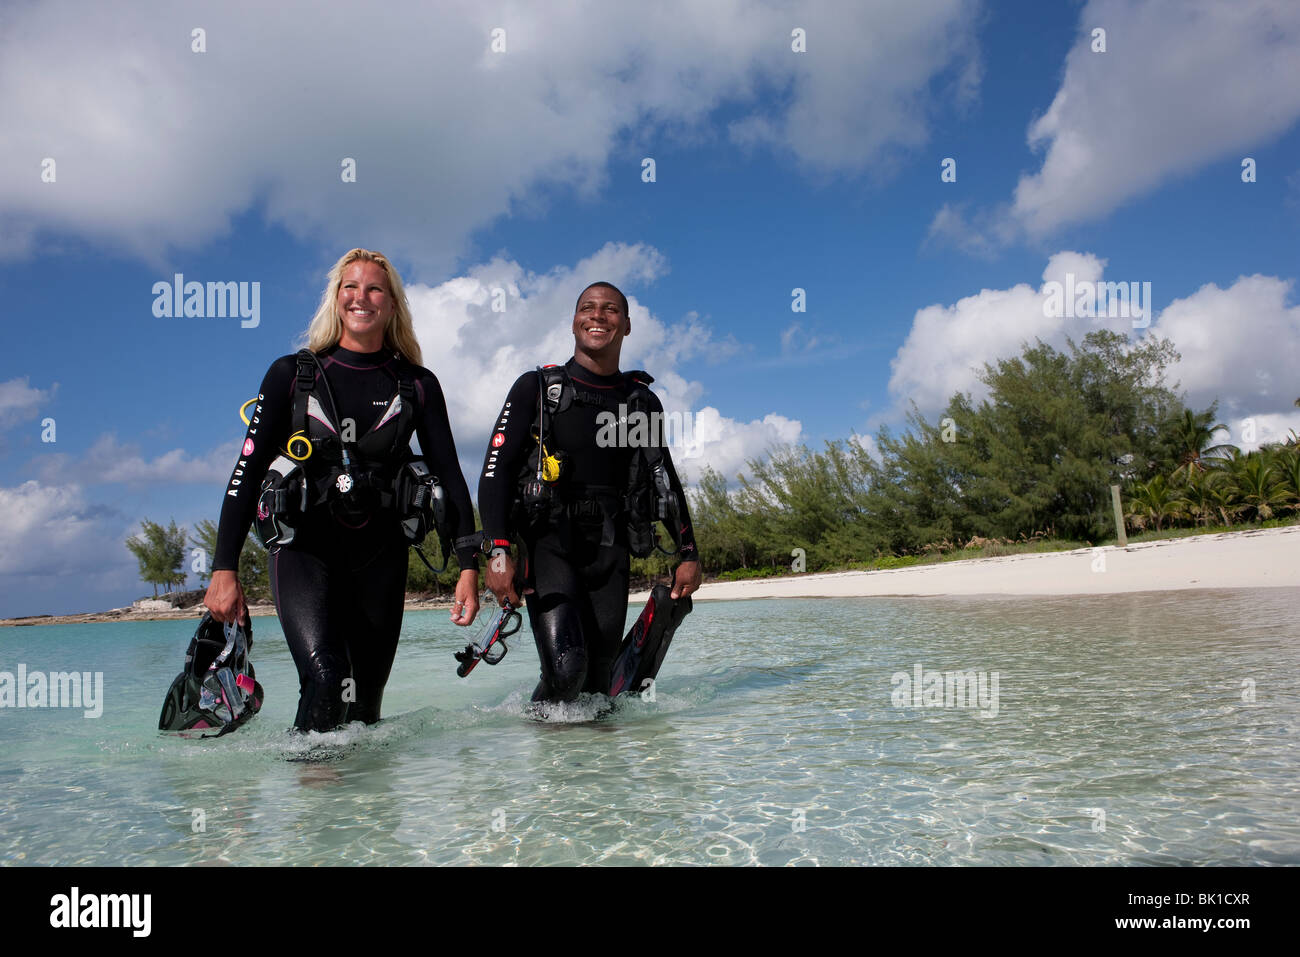 Scuba divers wading into water in full gear. Stock Photo